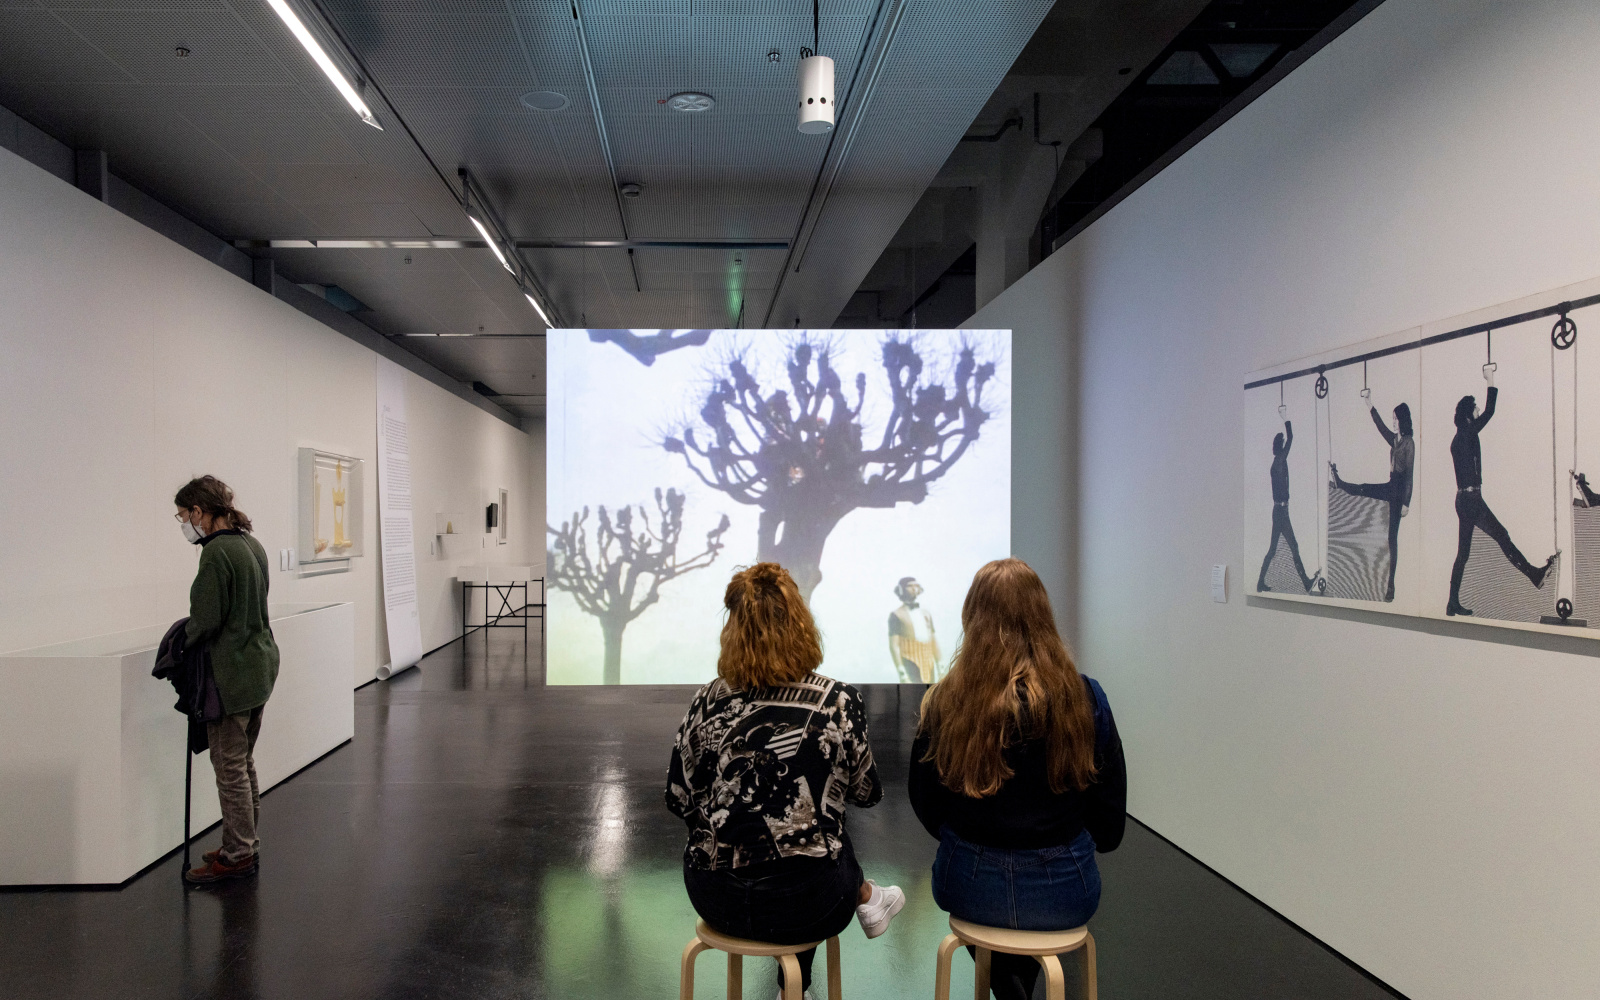 Three young women in the exhibition space. Two sit on stools in front of a film screen on which bare trees can be seen. An abstract drawing hangs on the wall to the right. On the left wall are boxes into which the third woman looks.